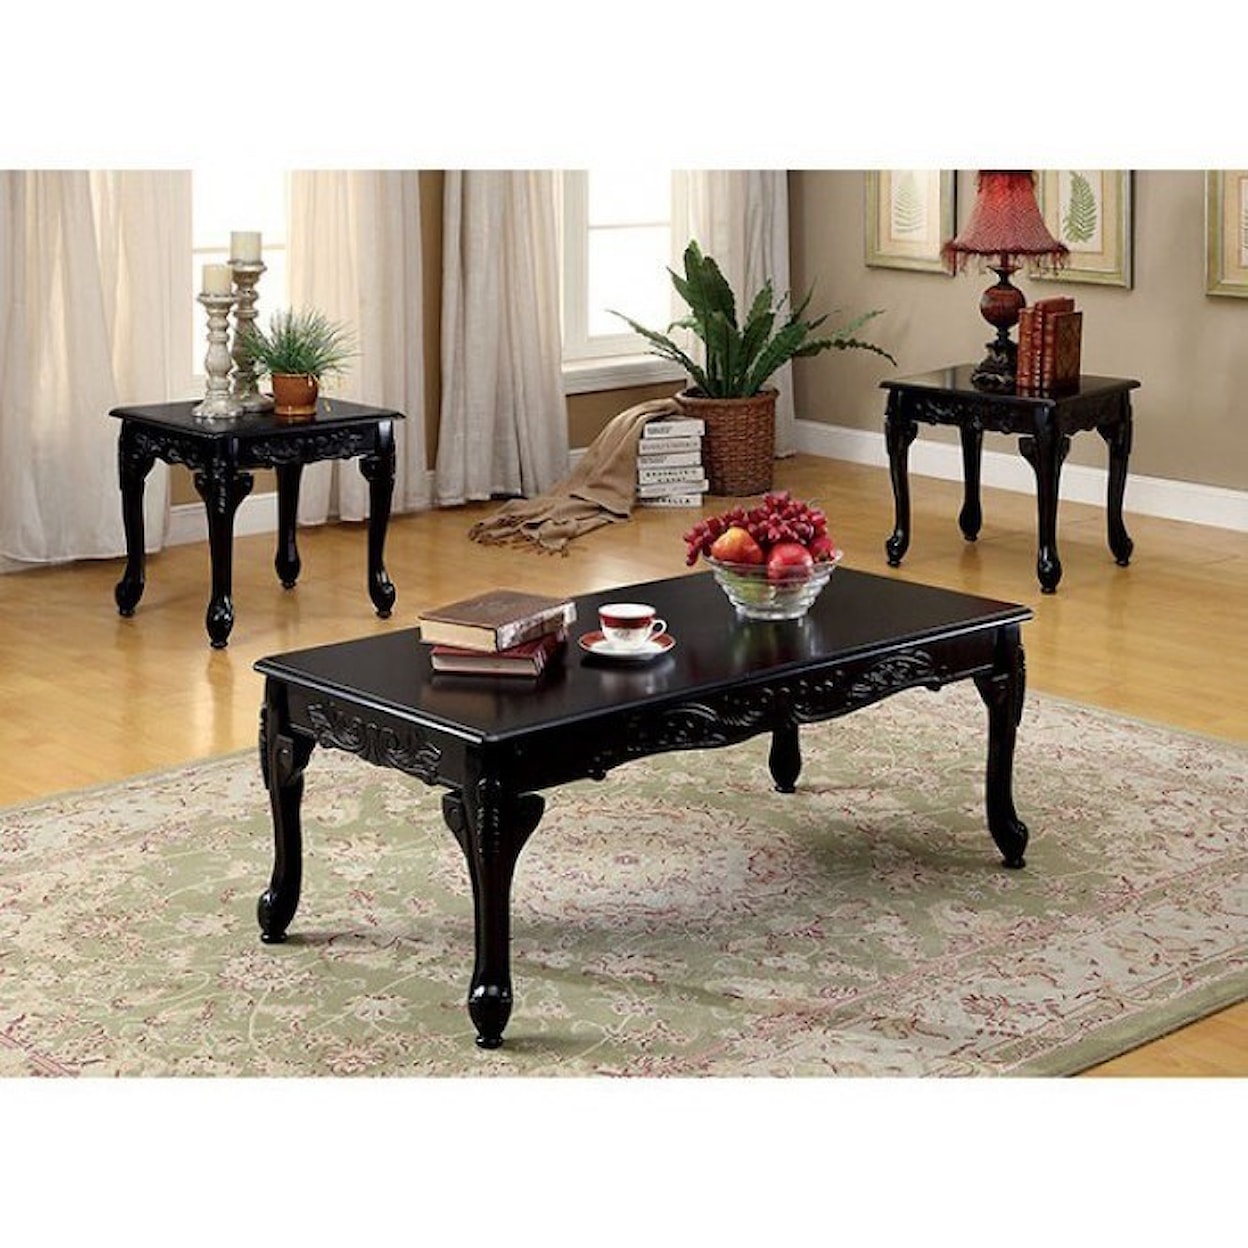 Furniture of America Cheshire 3 Piece Table Set